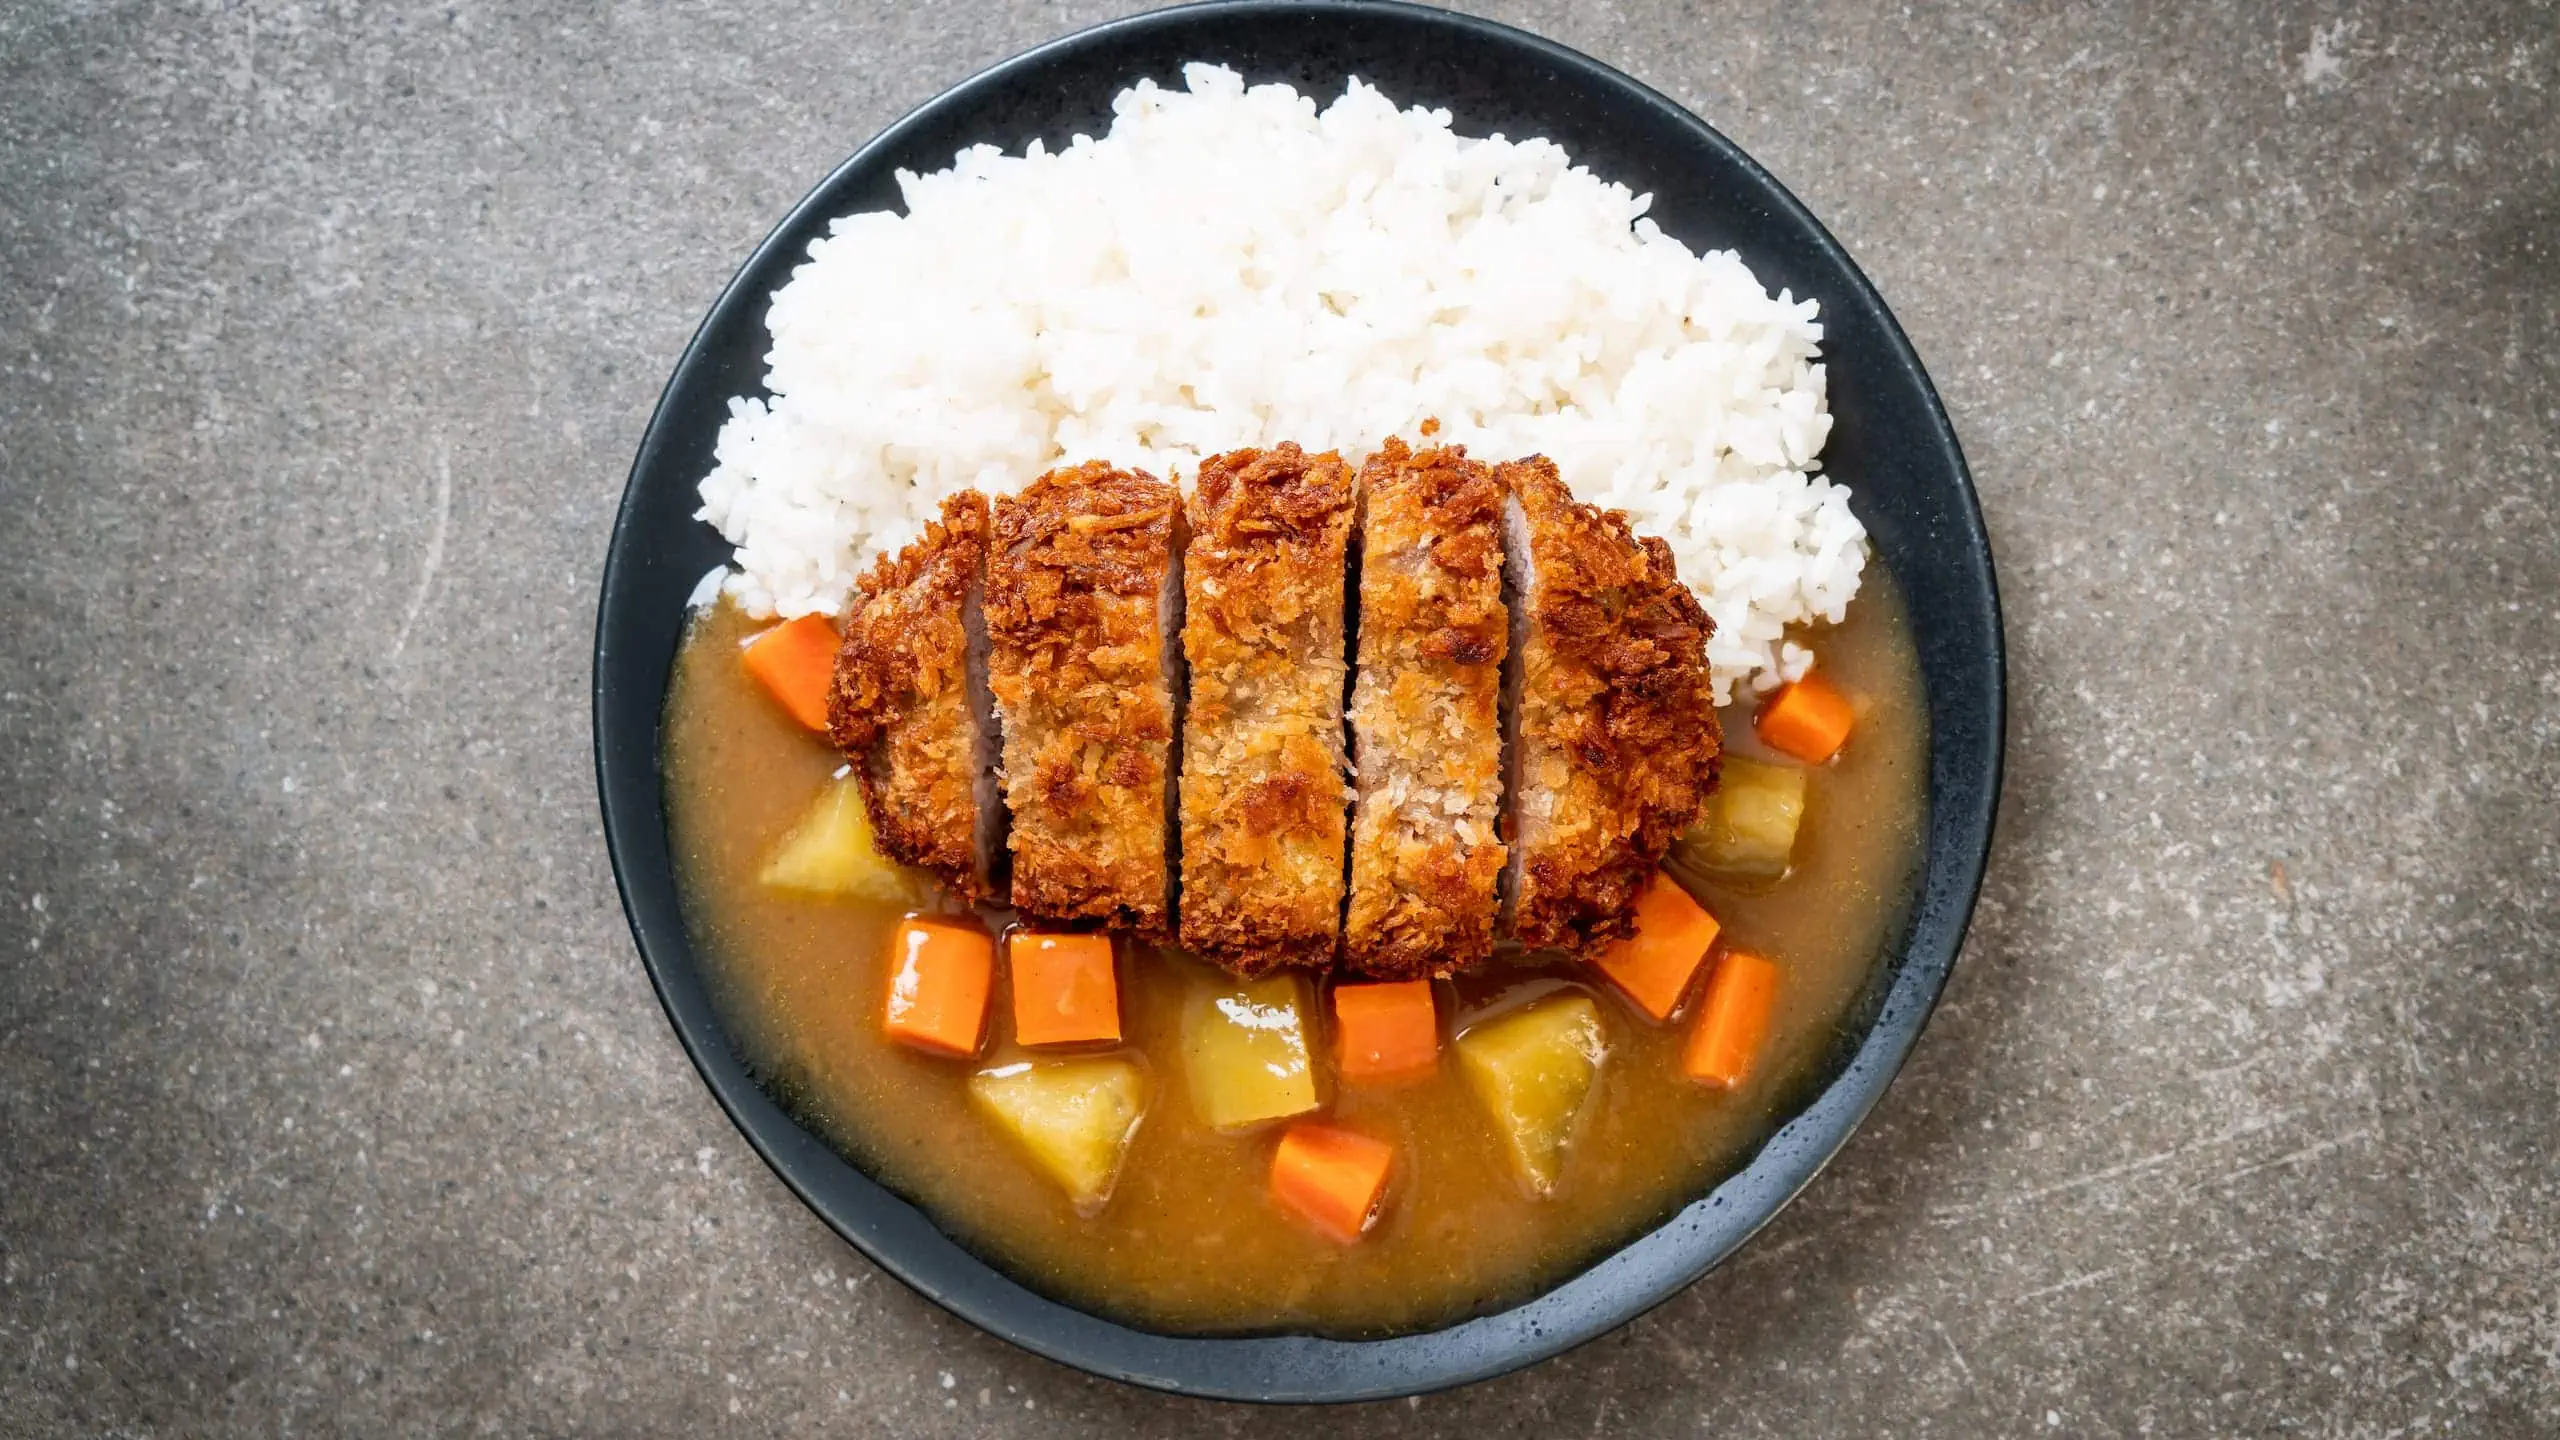 Crispy fried chicken cutlet with Coco's curry recipe and rice